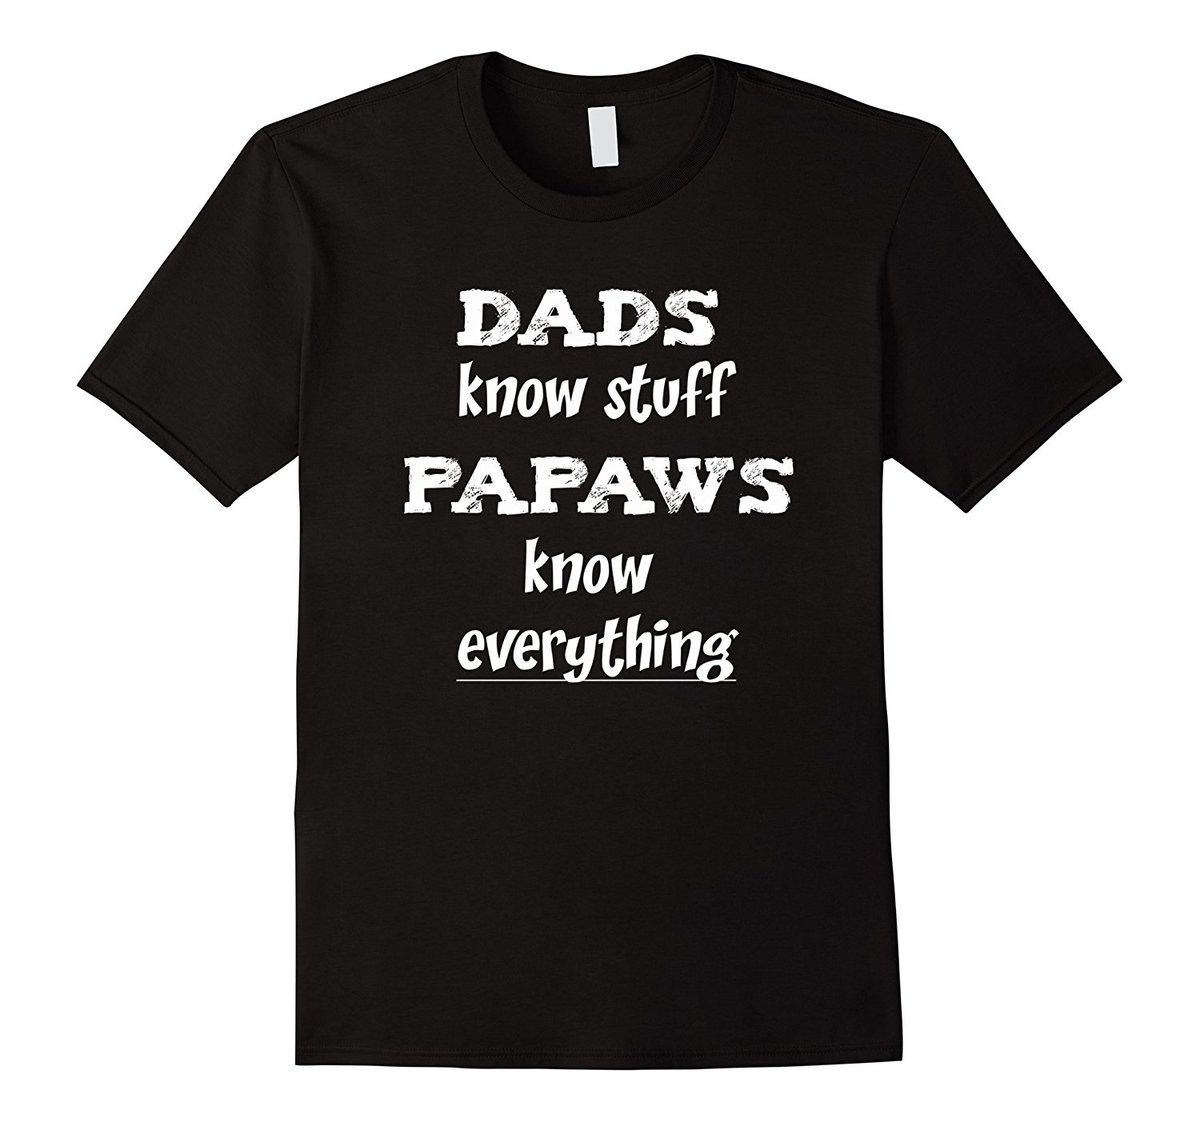 #Papaw Gift Shirt - Papaws Know Everything - #GrandparentsDay amzn.to/2F2p1Y7
#